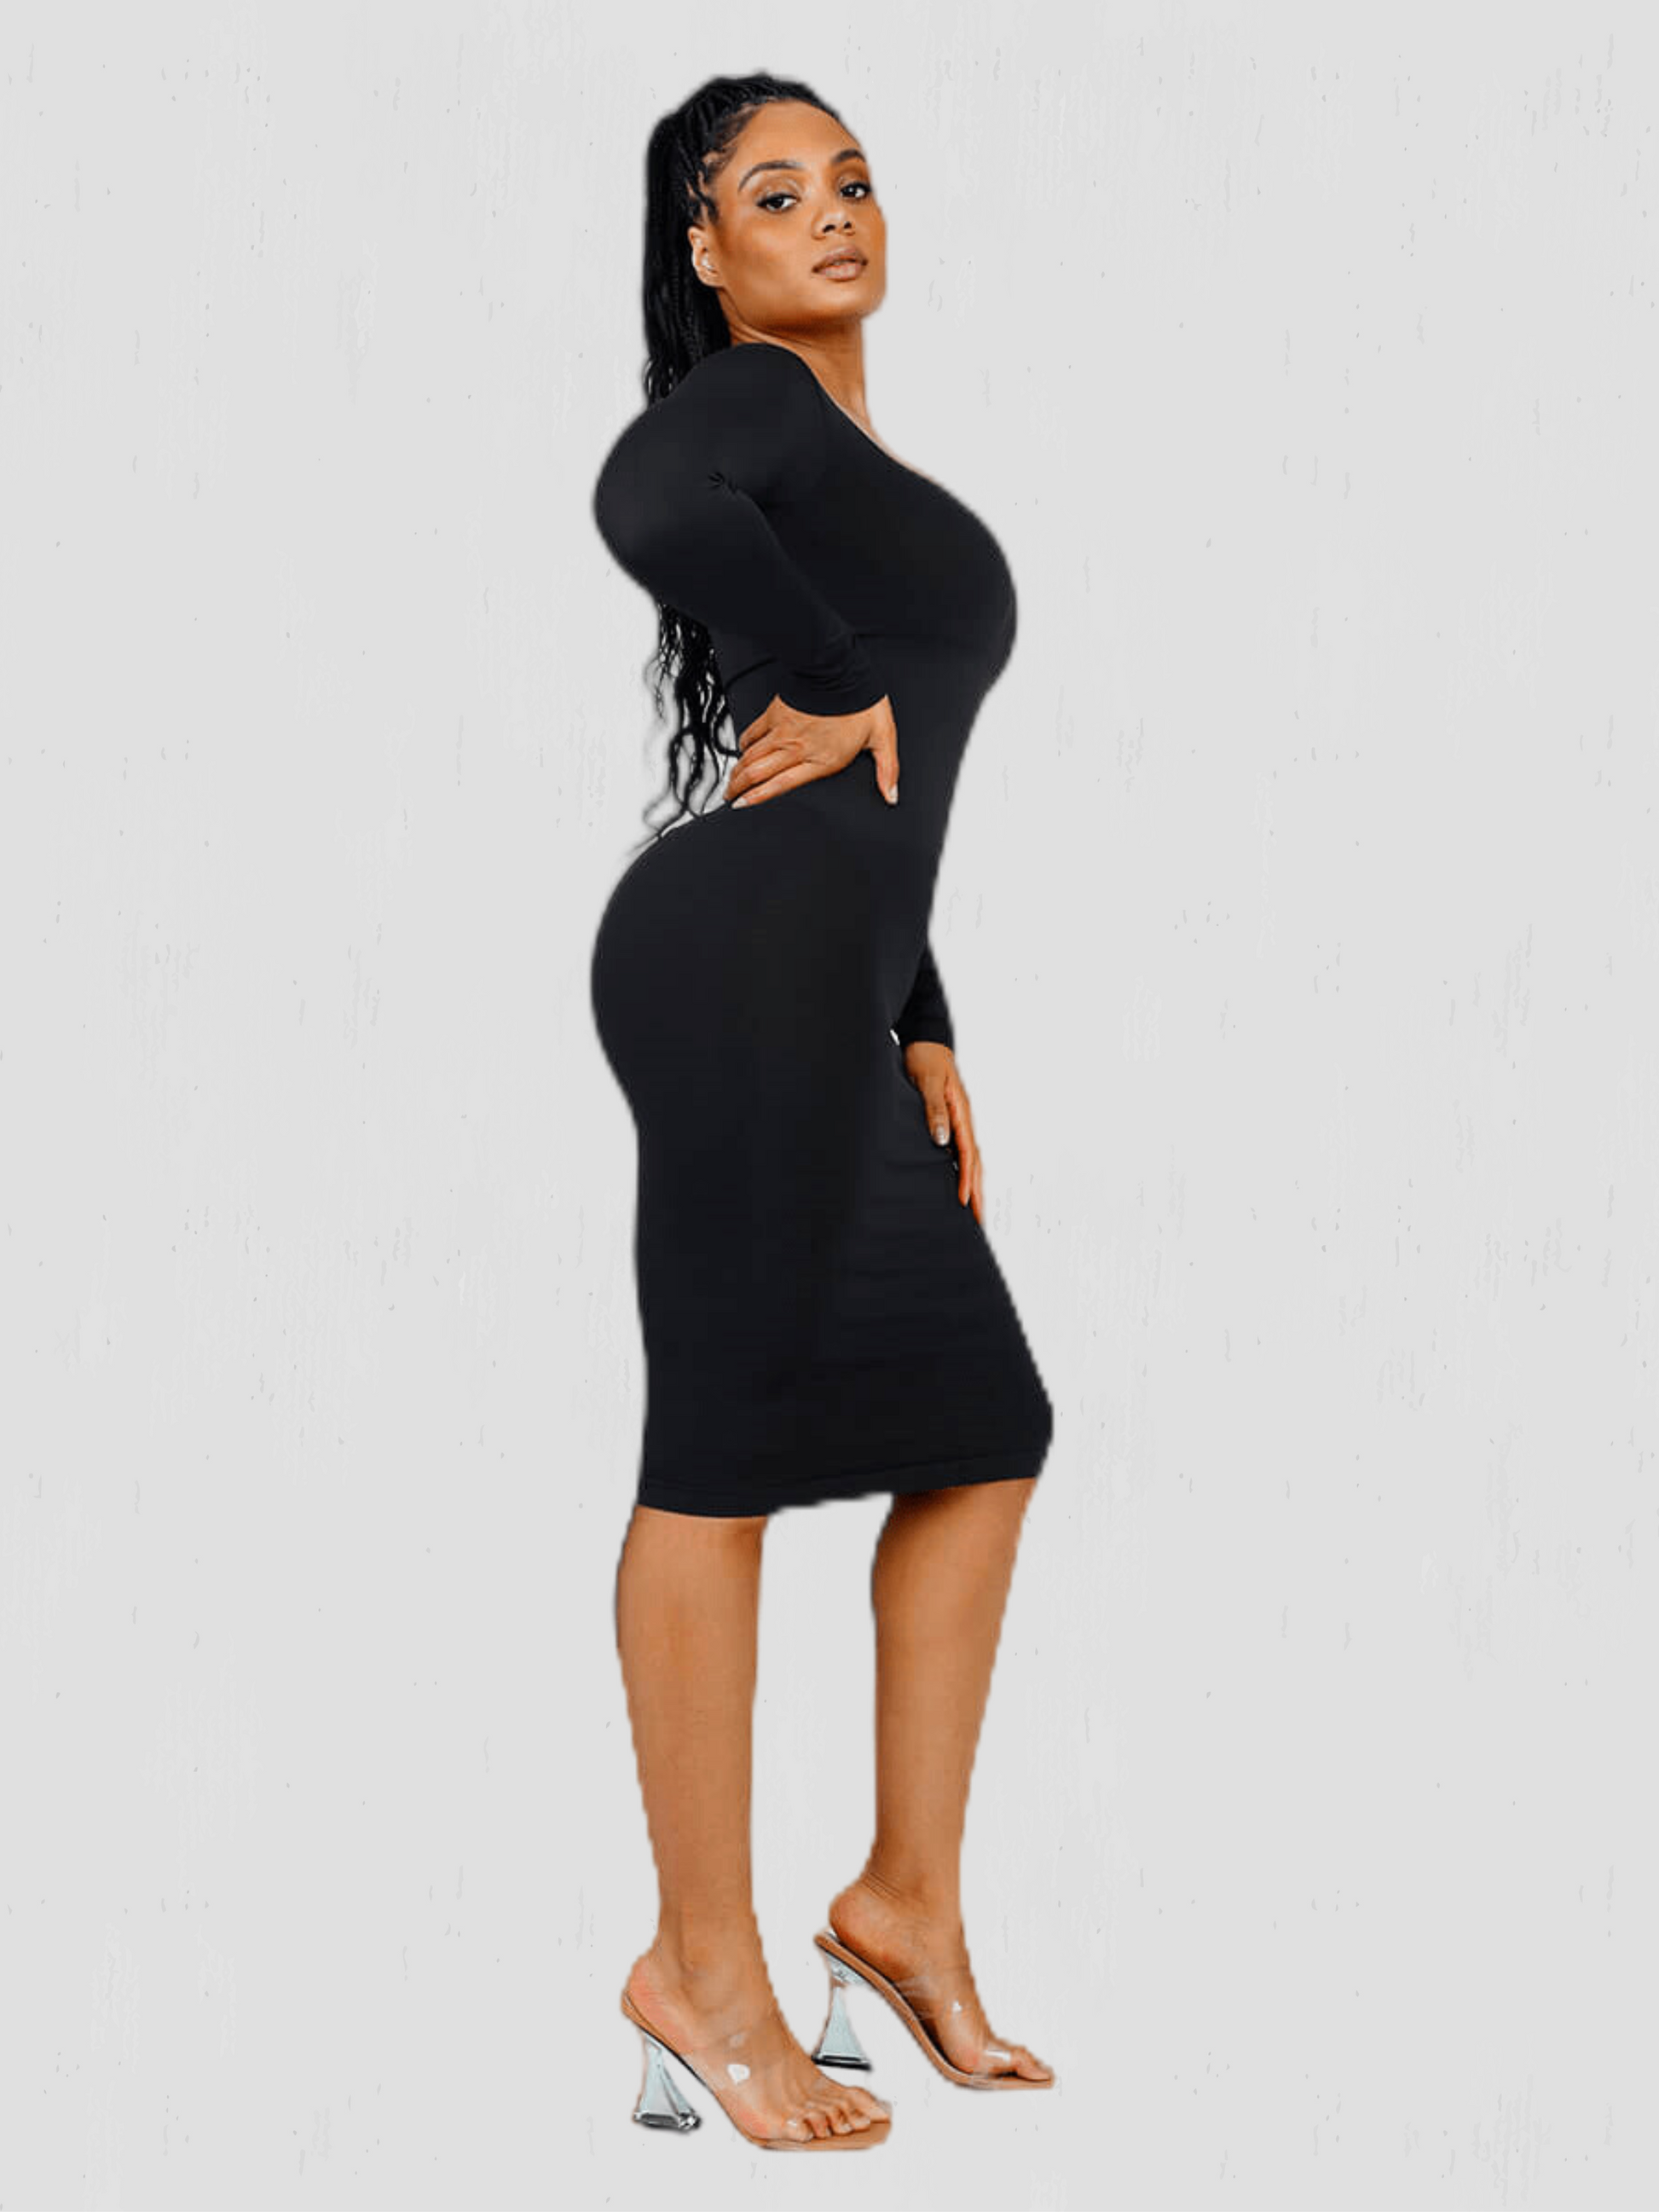 Our Built-In Shapewear Shorts Long Sleeve Dress is the perfect mini dr